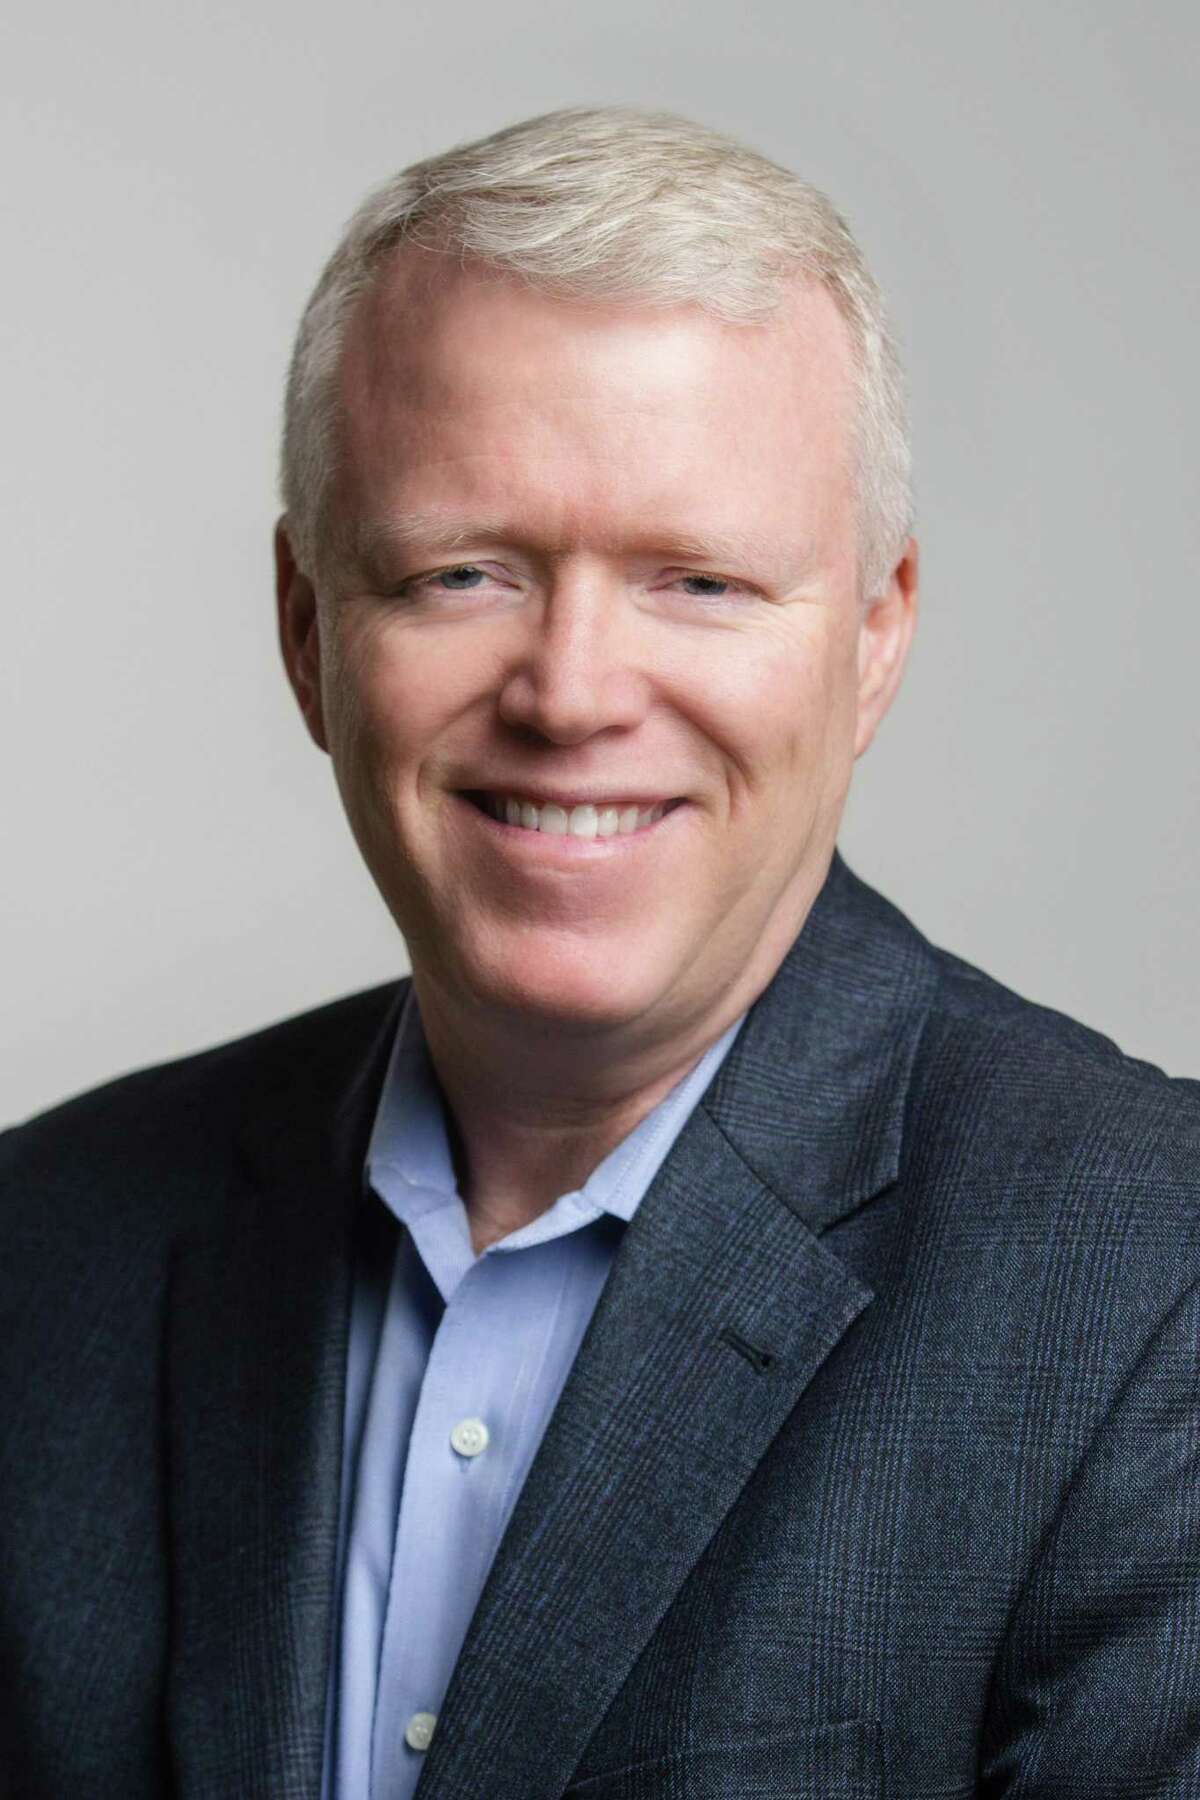 Doug Claffey is founder of Energage, which conducts the Top Workplaces survey for The Houston Chronicle.